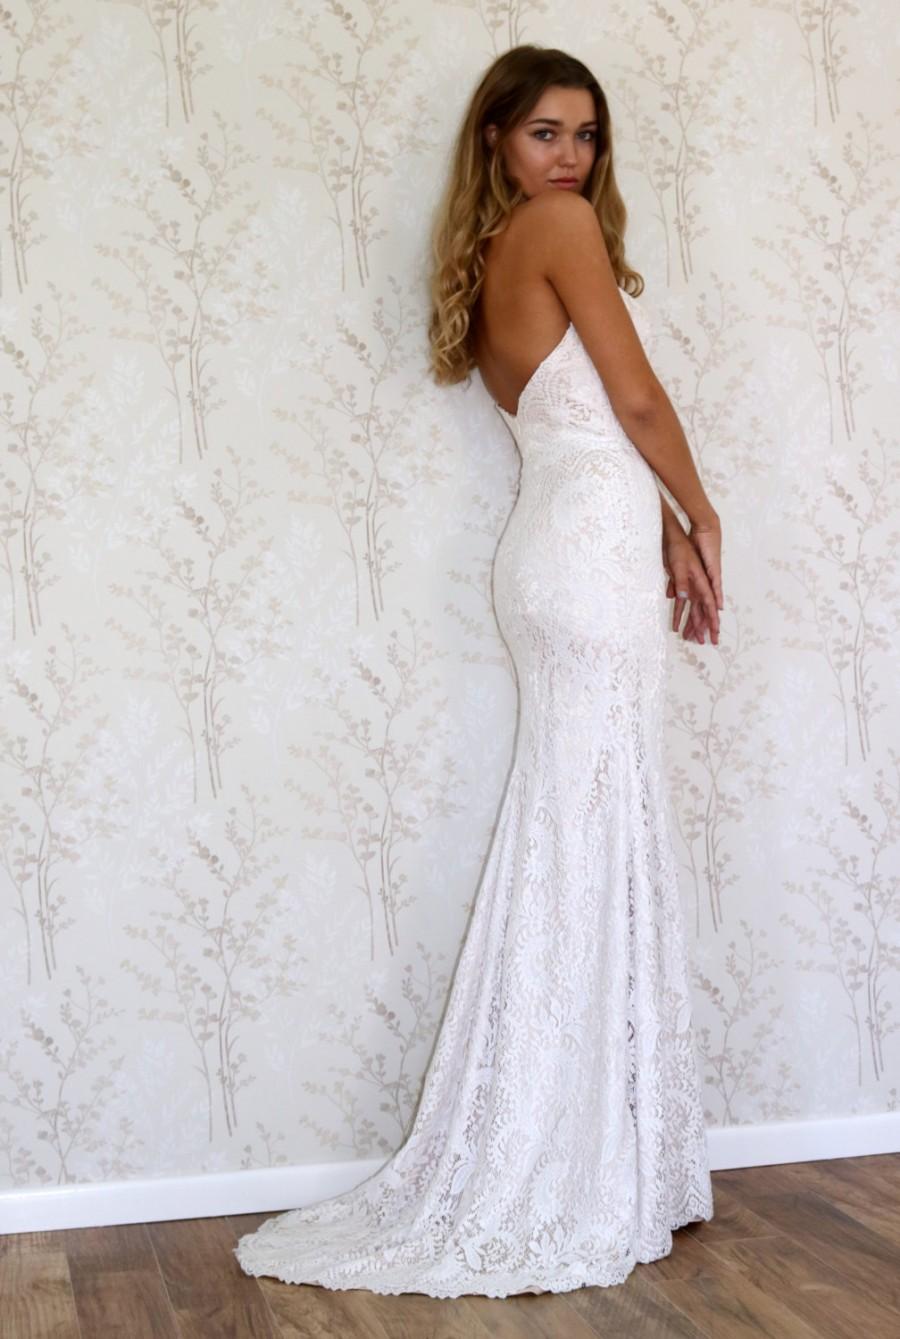 Lace Wedding Dress Simple Bohemian Style Wedding Gown Strapless